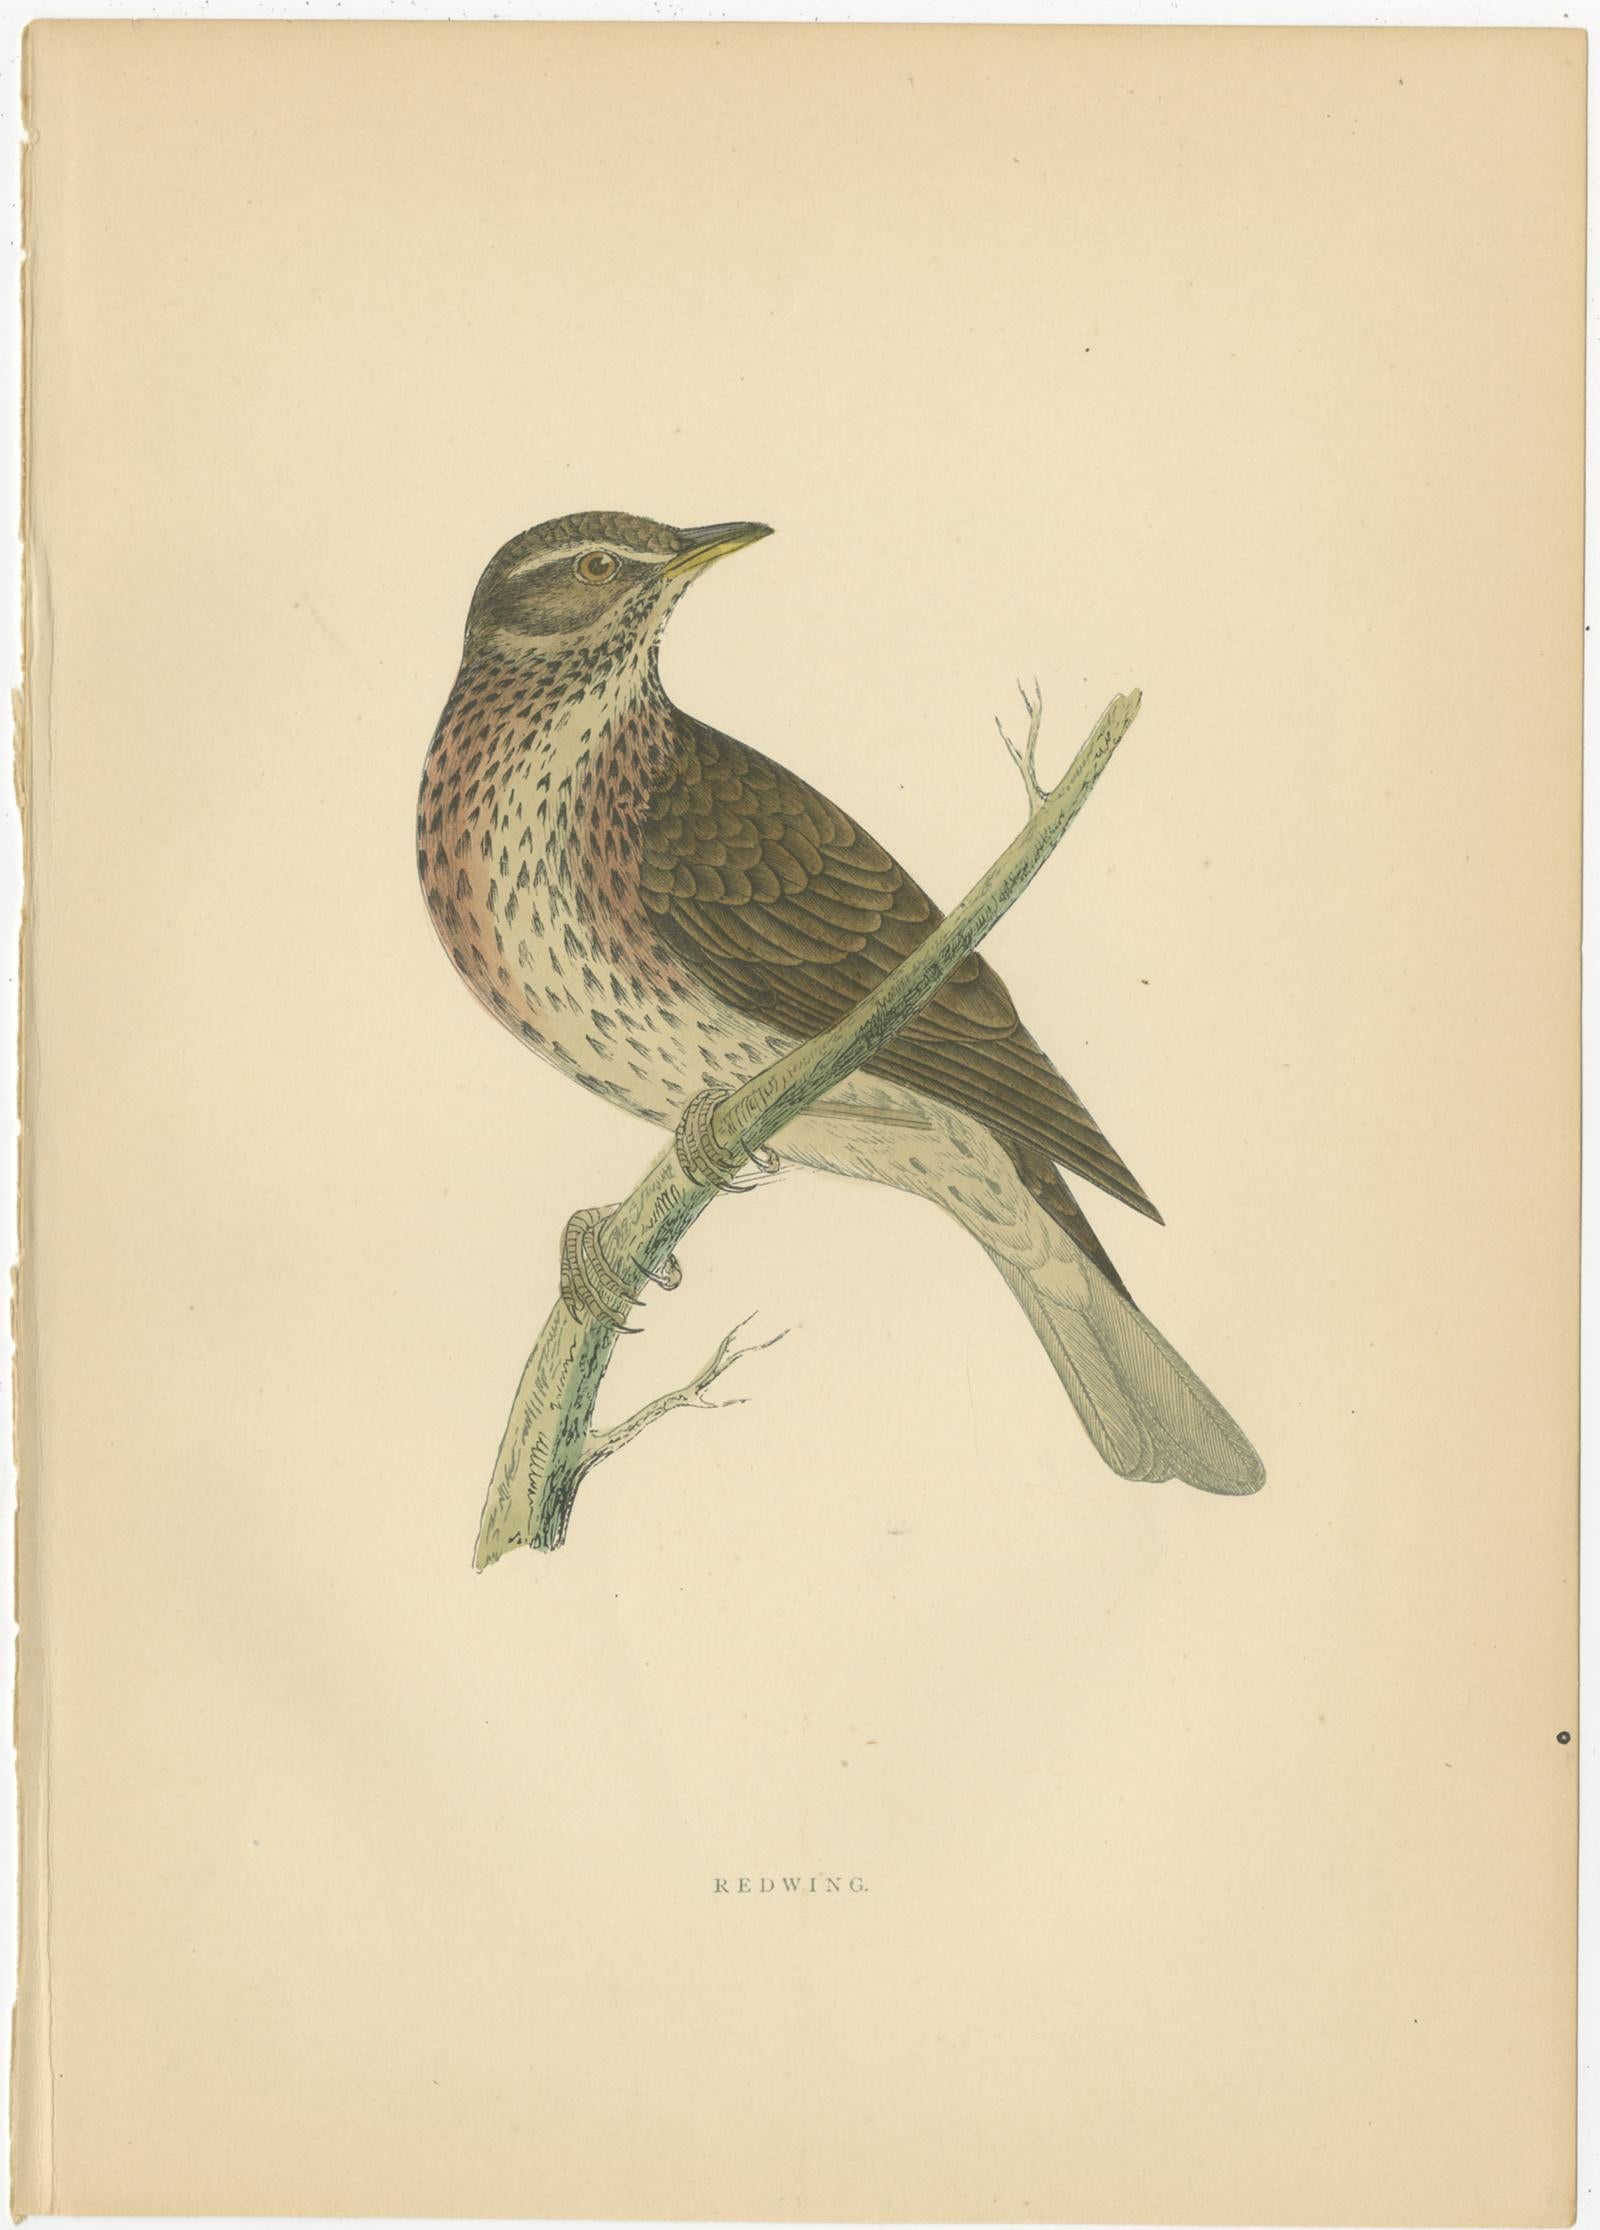 Set of five antique bird prints titled 'Crow, Redwing, Missel Thrush, Black-Throated Thrush, Fieldfare'. These prints originate from 'A History of British Birds' by Rev. Franis Orpen Morris. Published circa 1860.